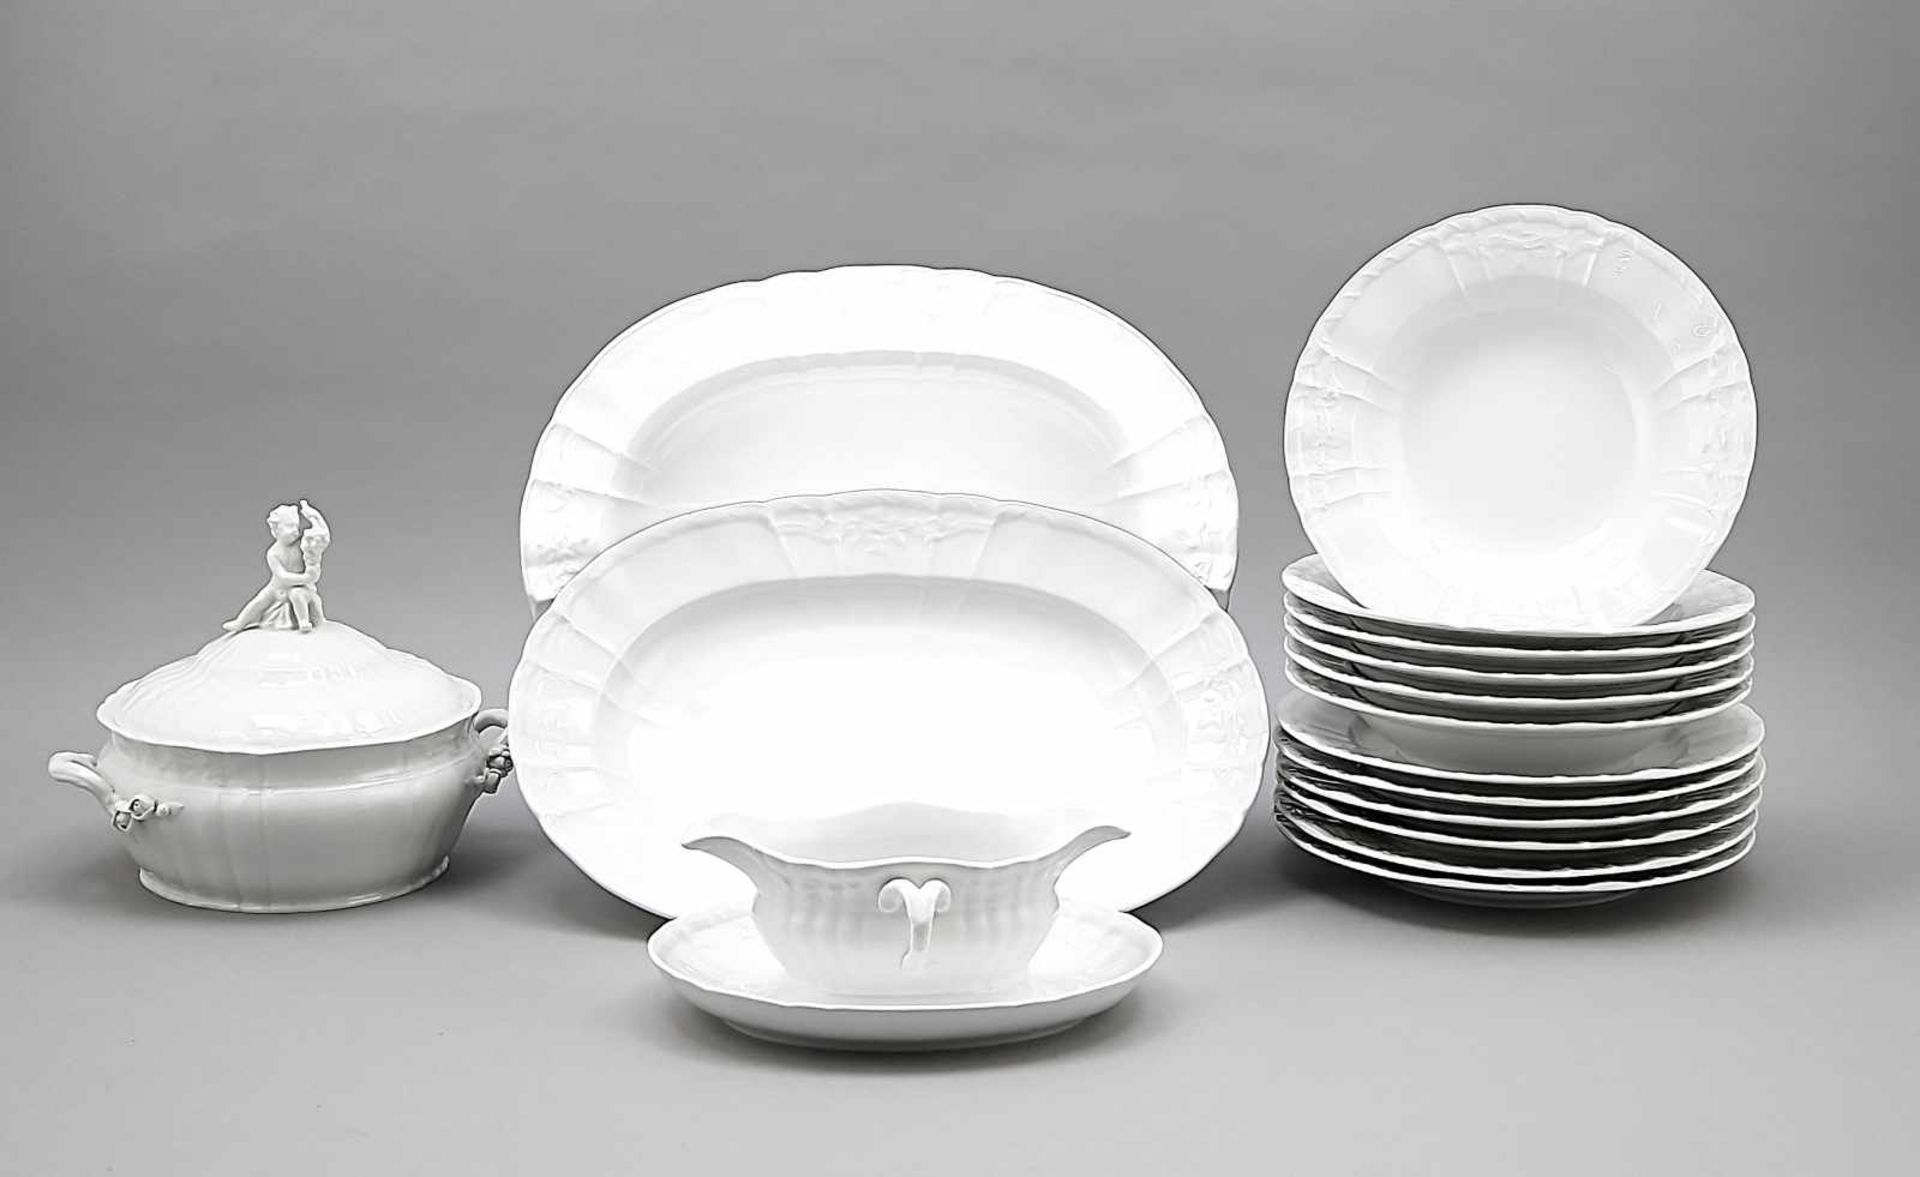 Dining service for 6 people, 16 pieces, KPM Berlin, mark 1962-92, 1st quality, Rocaille